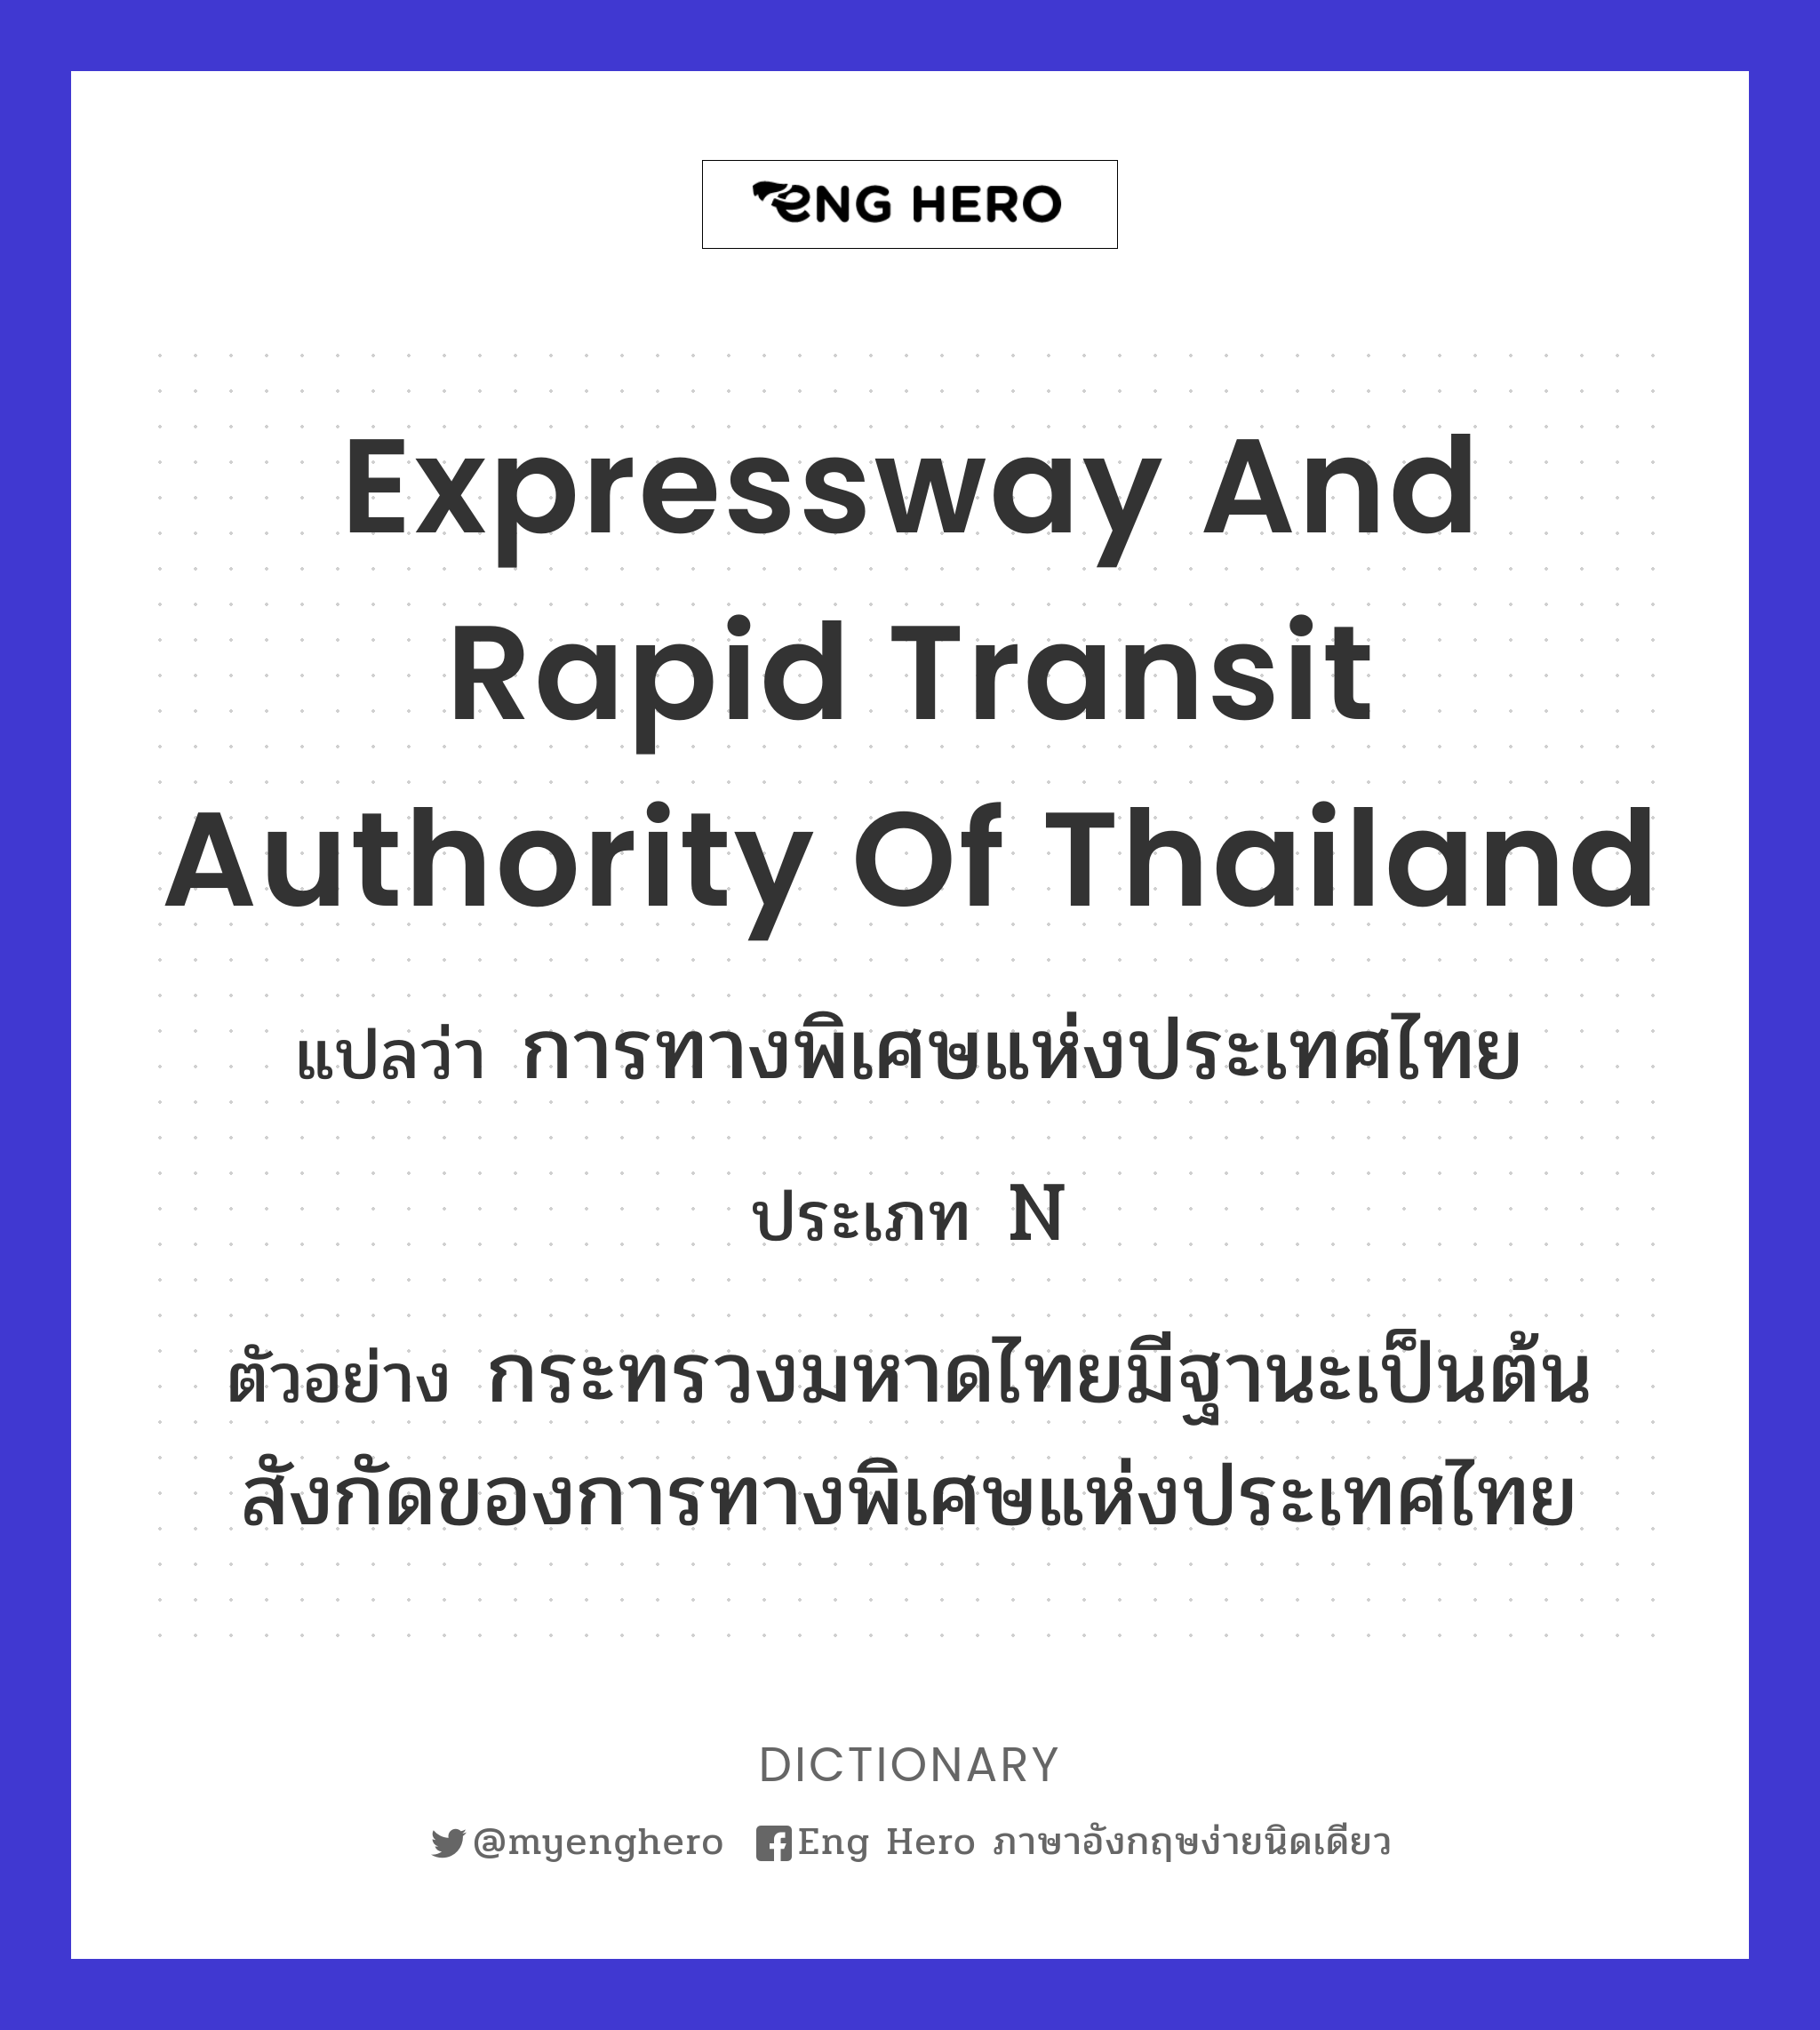 Expressway and Rapid Transit Authority of Thailand